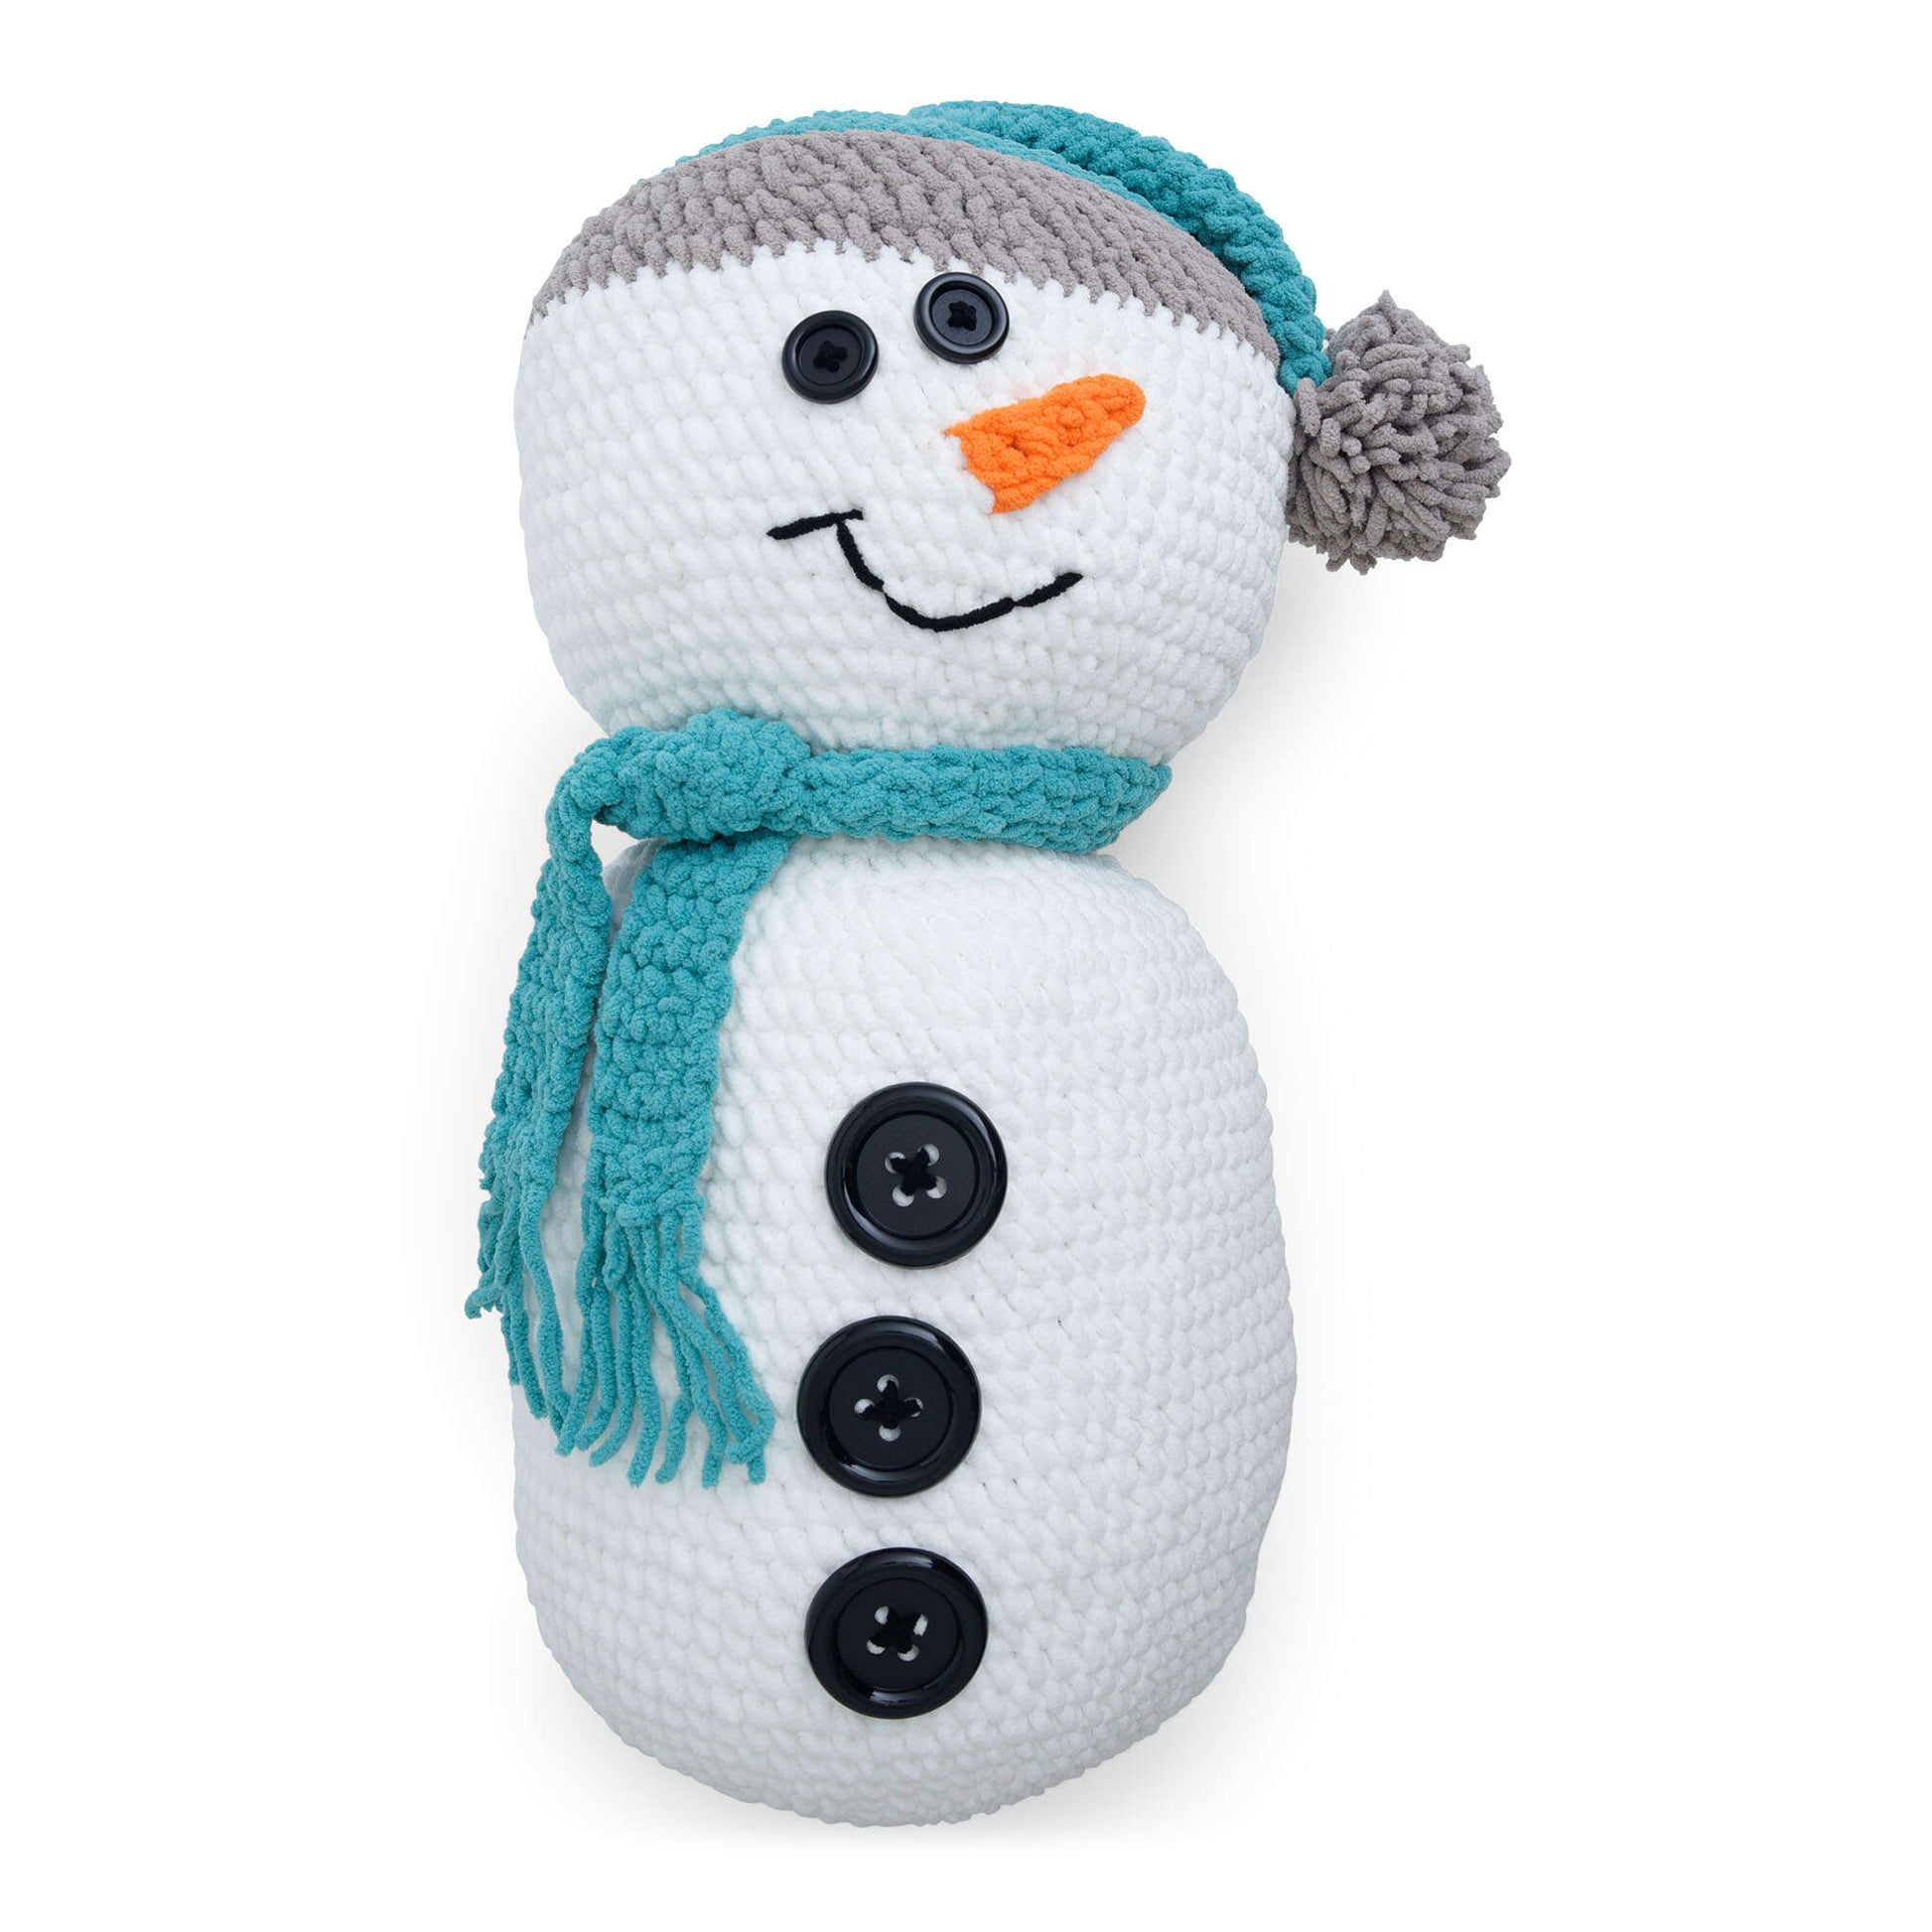 How to Make an Easy Sock Snowman Craft - This Pixie Creates